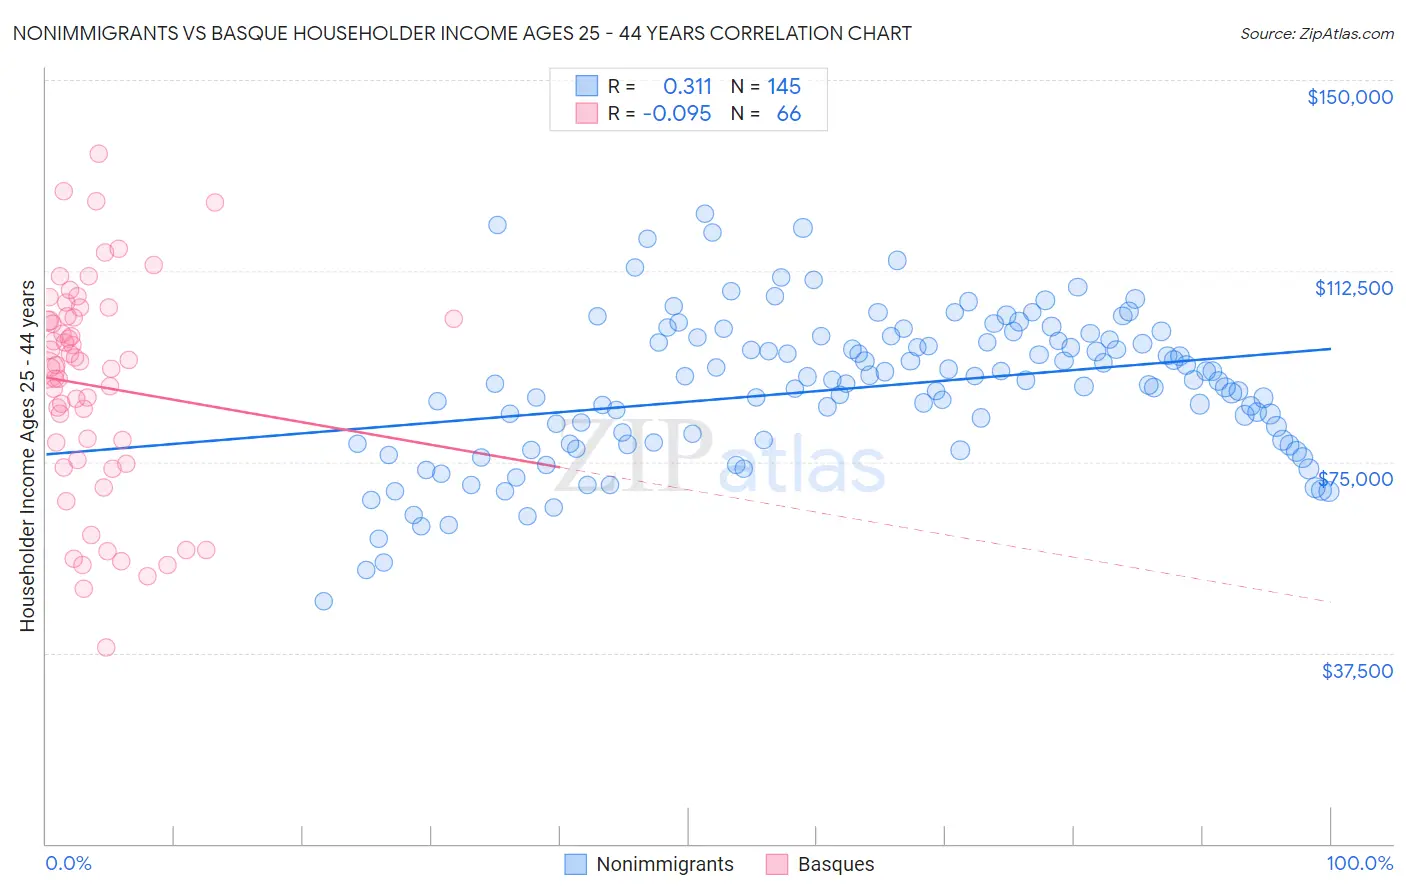 Nonimmigrants vs Basque Householder Income Ages 25 - 44 years